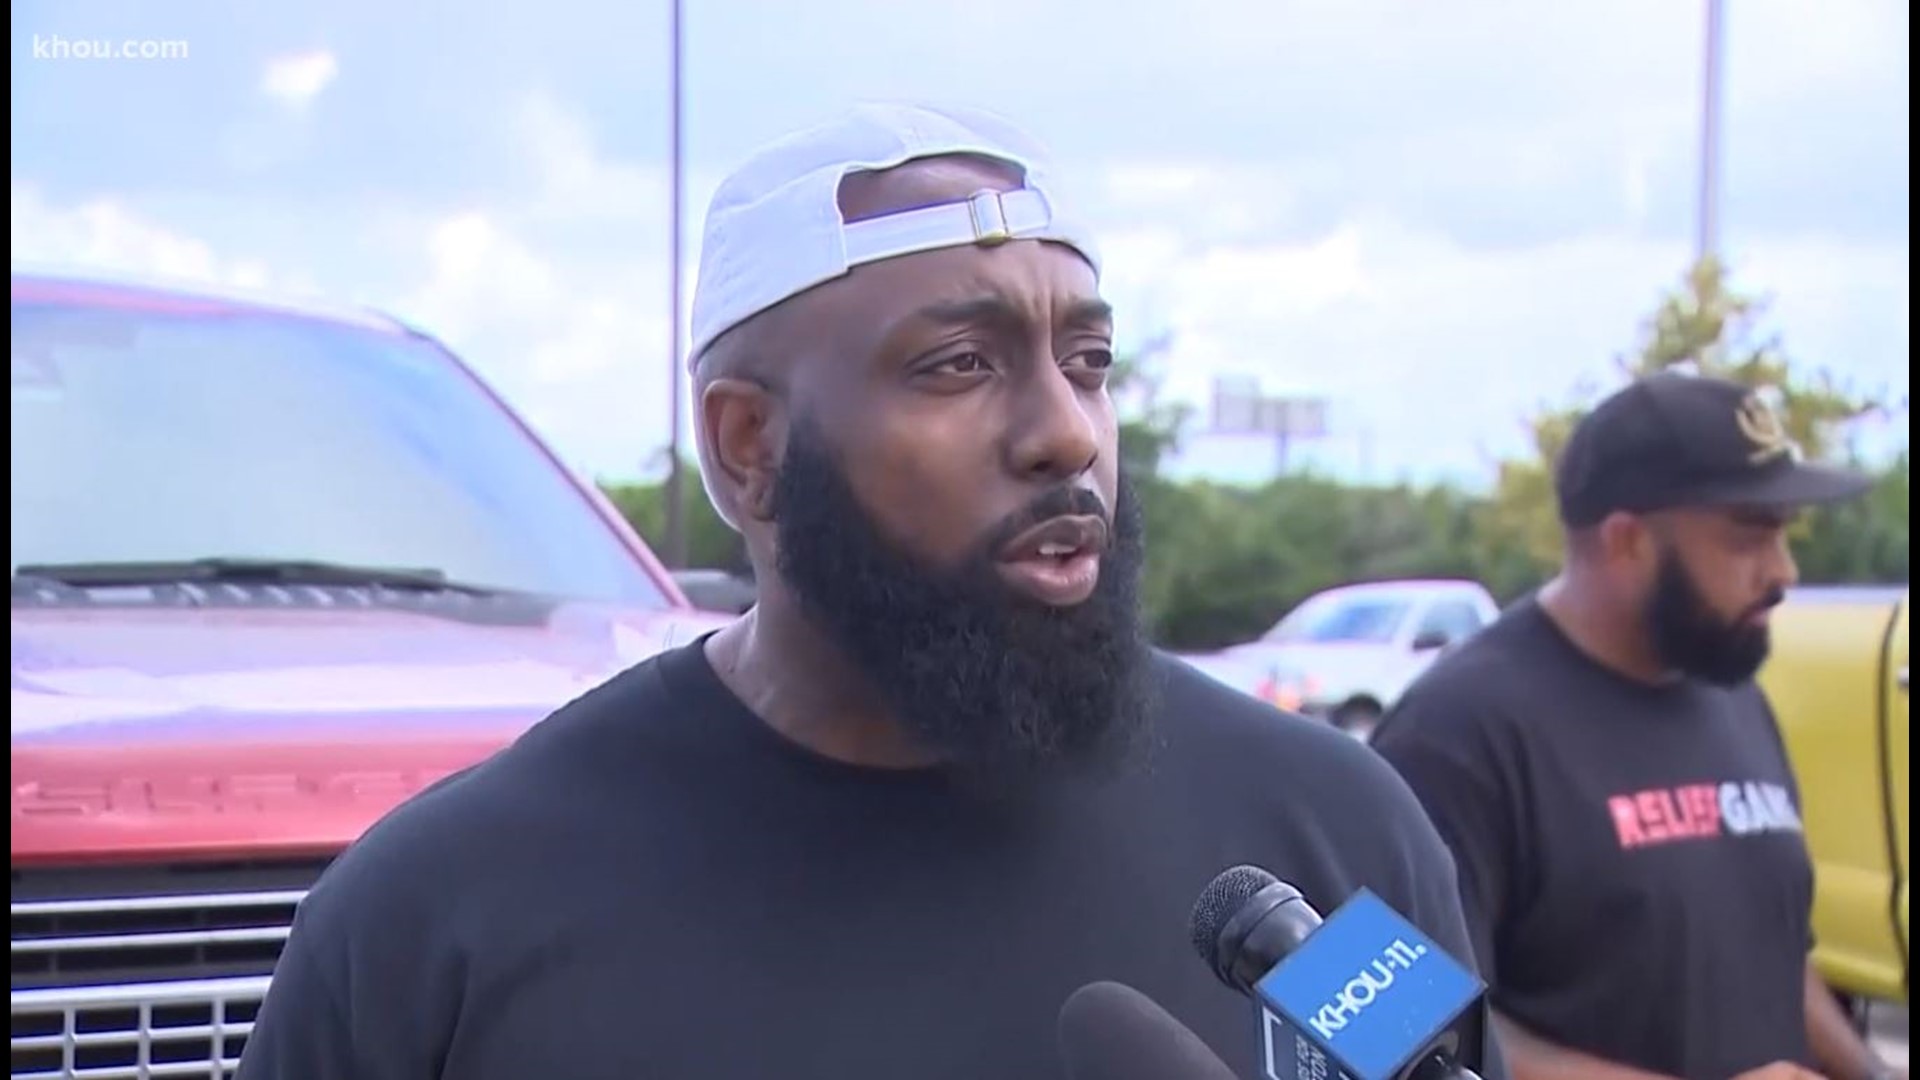 Houston rapper Trae the Truth and volunteers are heading to Louisiana to help with Hurricane Laura recovery.